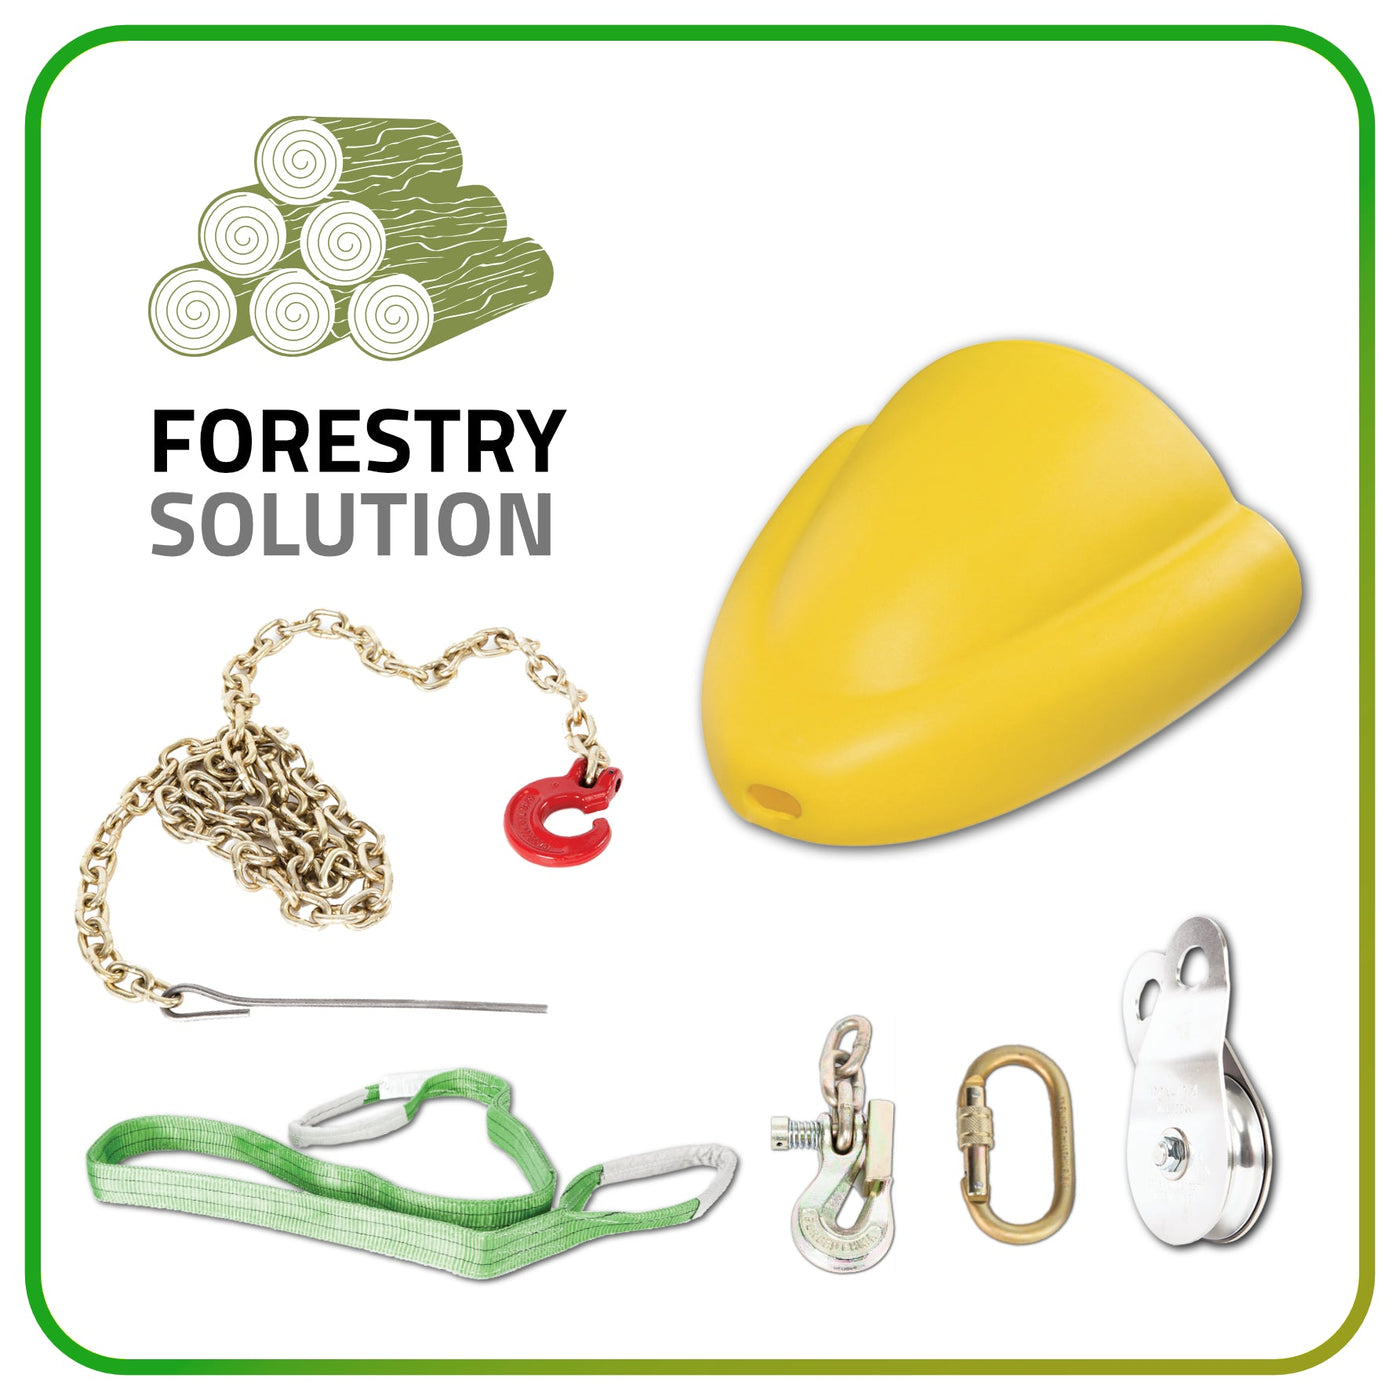 Forestry winch kit